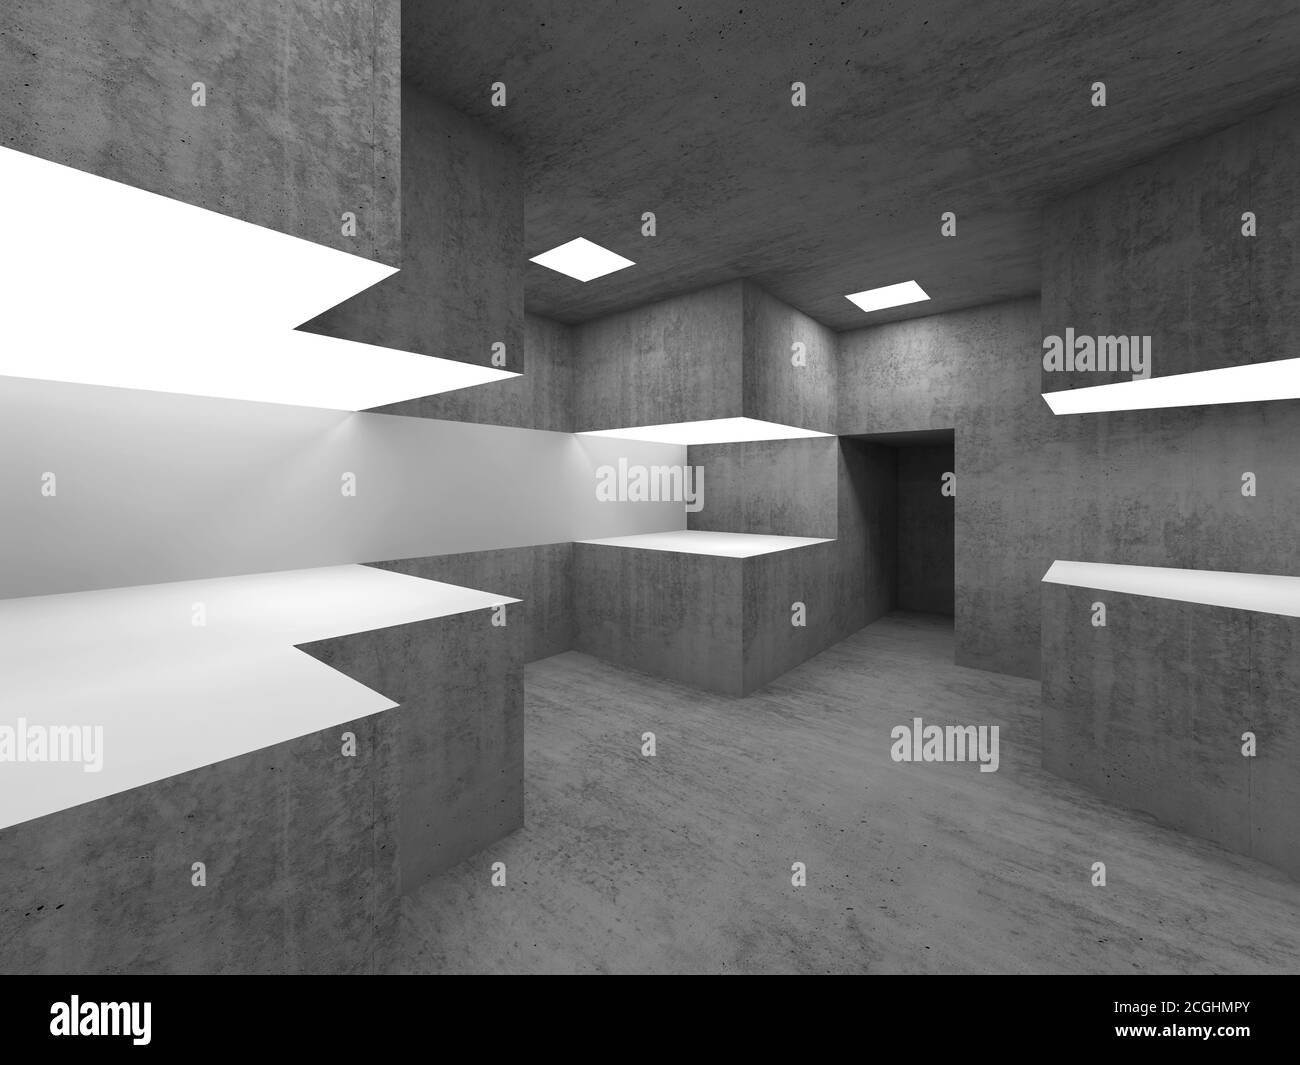 Empty concrete room interior with illuminated white exhibition stands. 3d rendering illustration Stock Photo